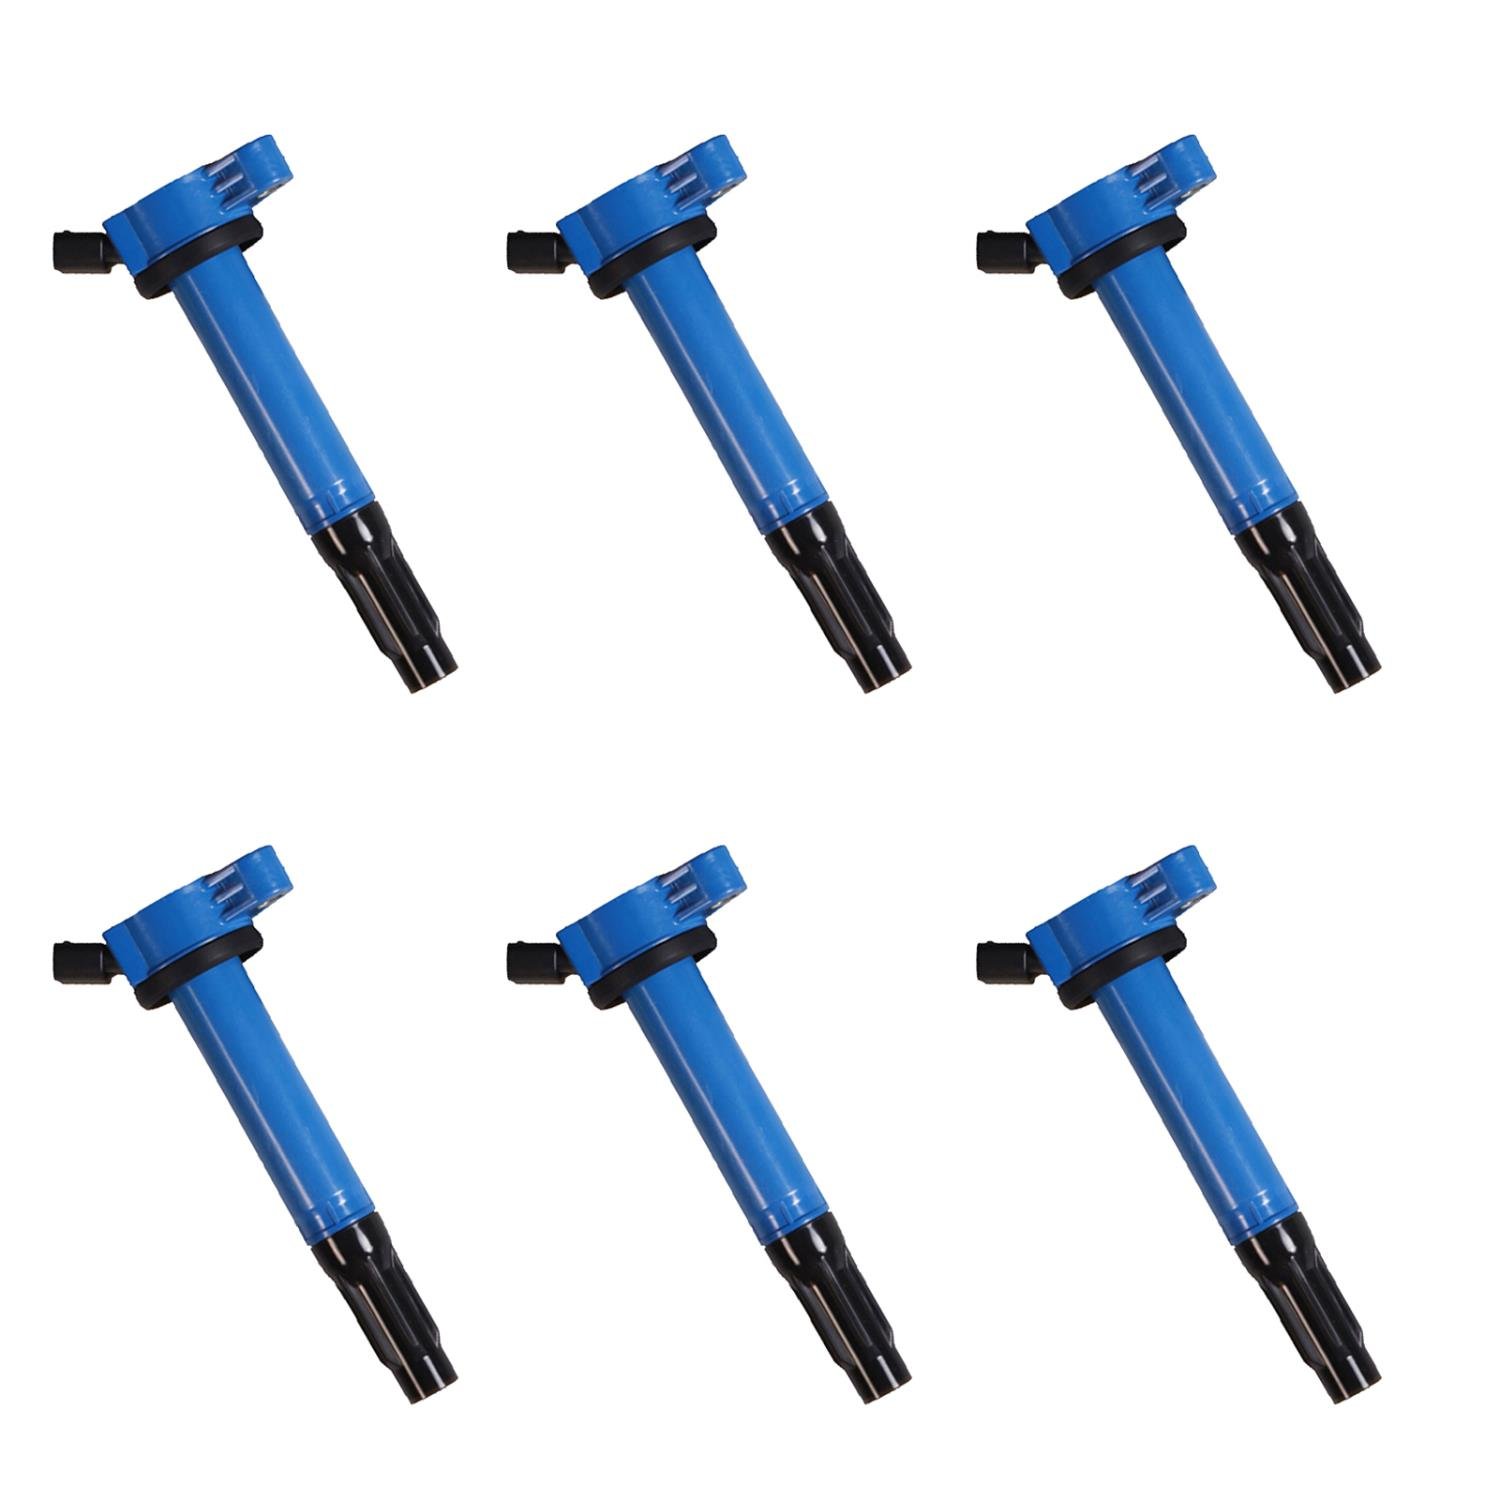 High-Performance Ignition Coils for Toyota Camry/RAV4 [Blue]